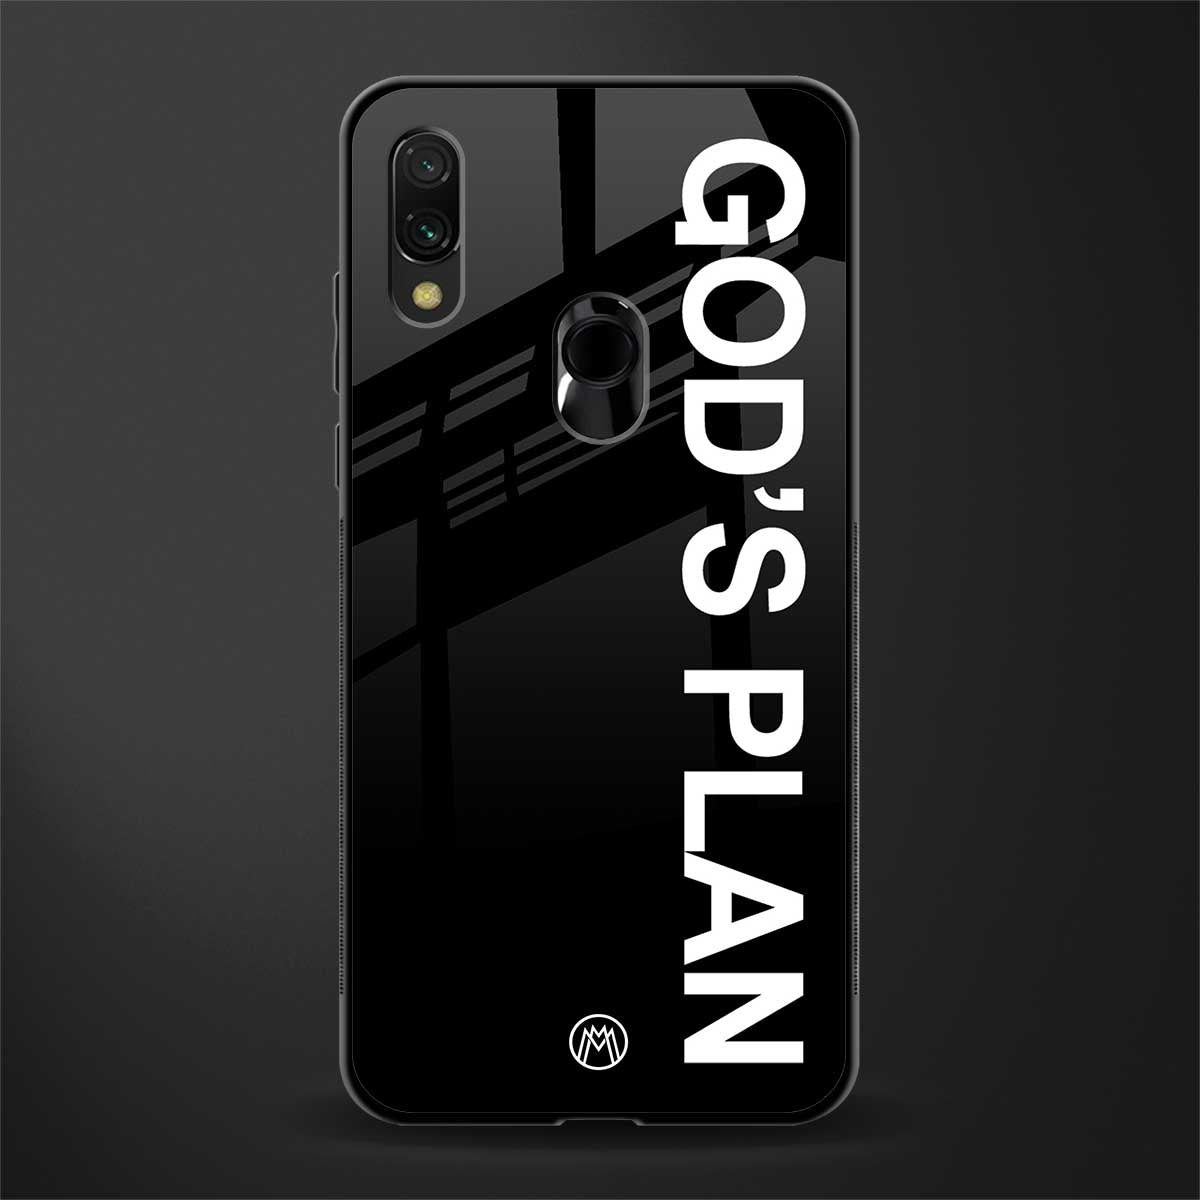 god's plan glass case for redmi note 7 pro image